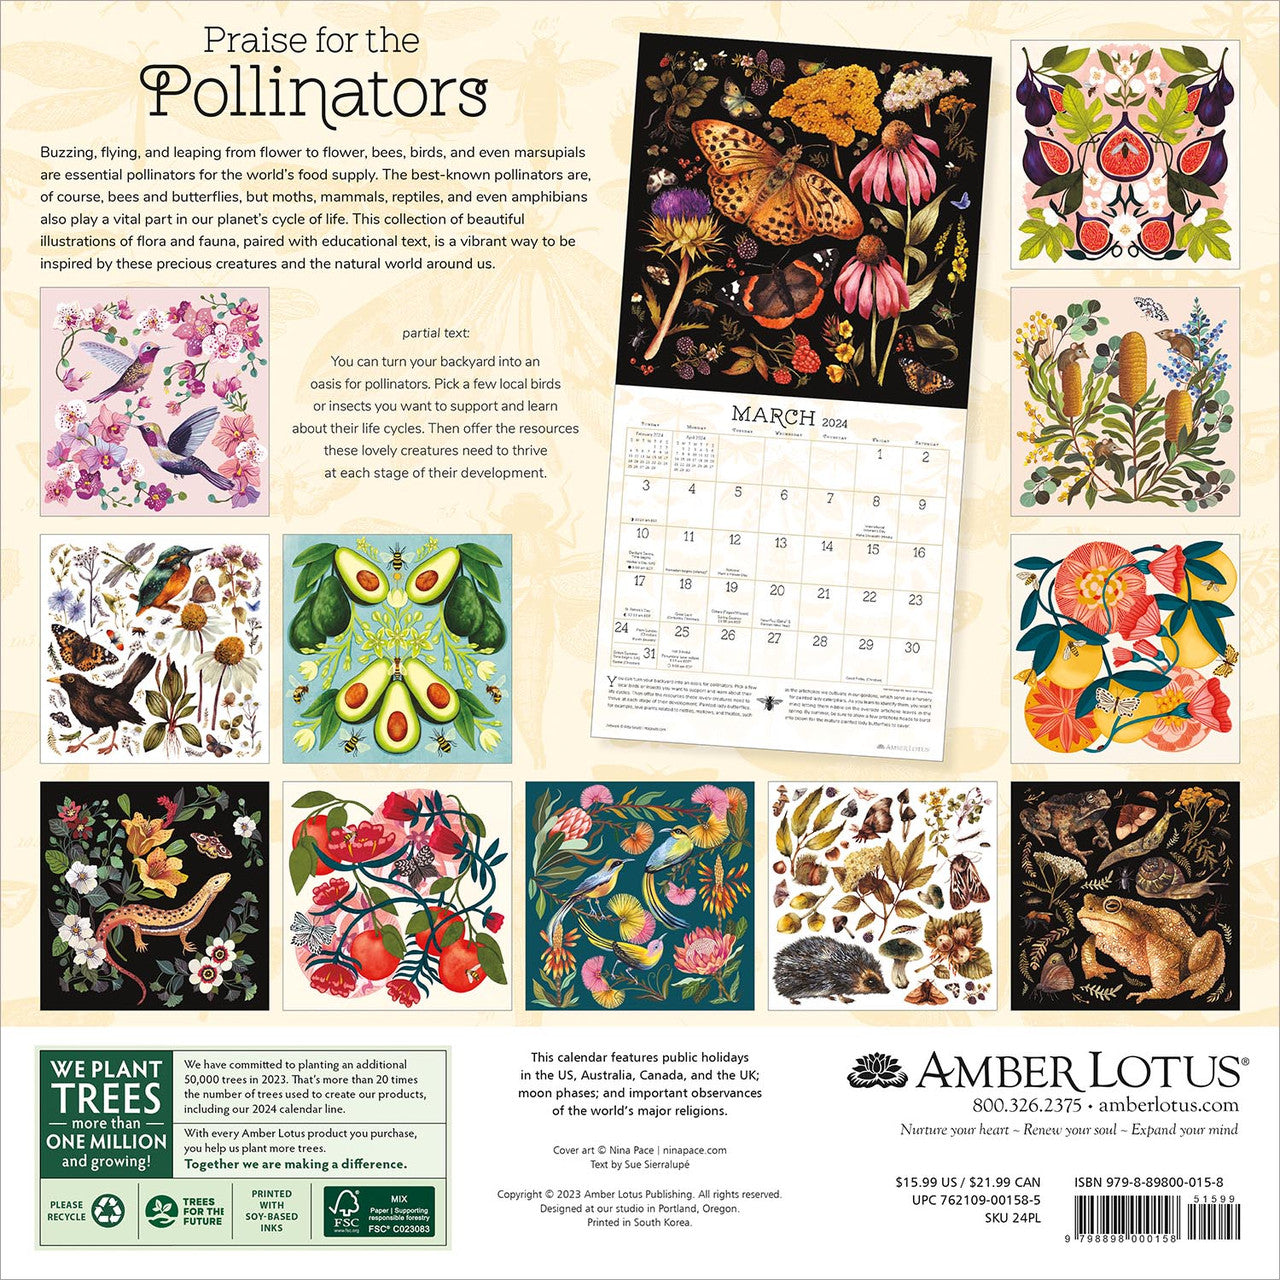 praise-for-the-pollinators-2022-wall-calendar-nature-s-superheroes-in